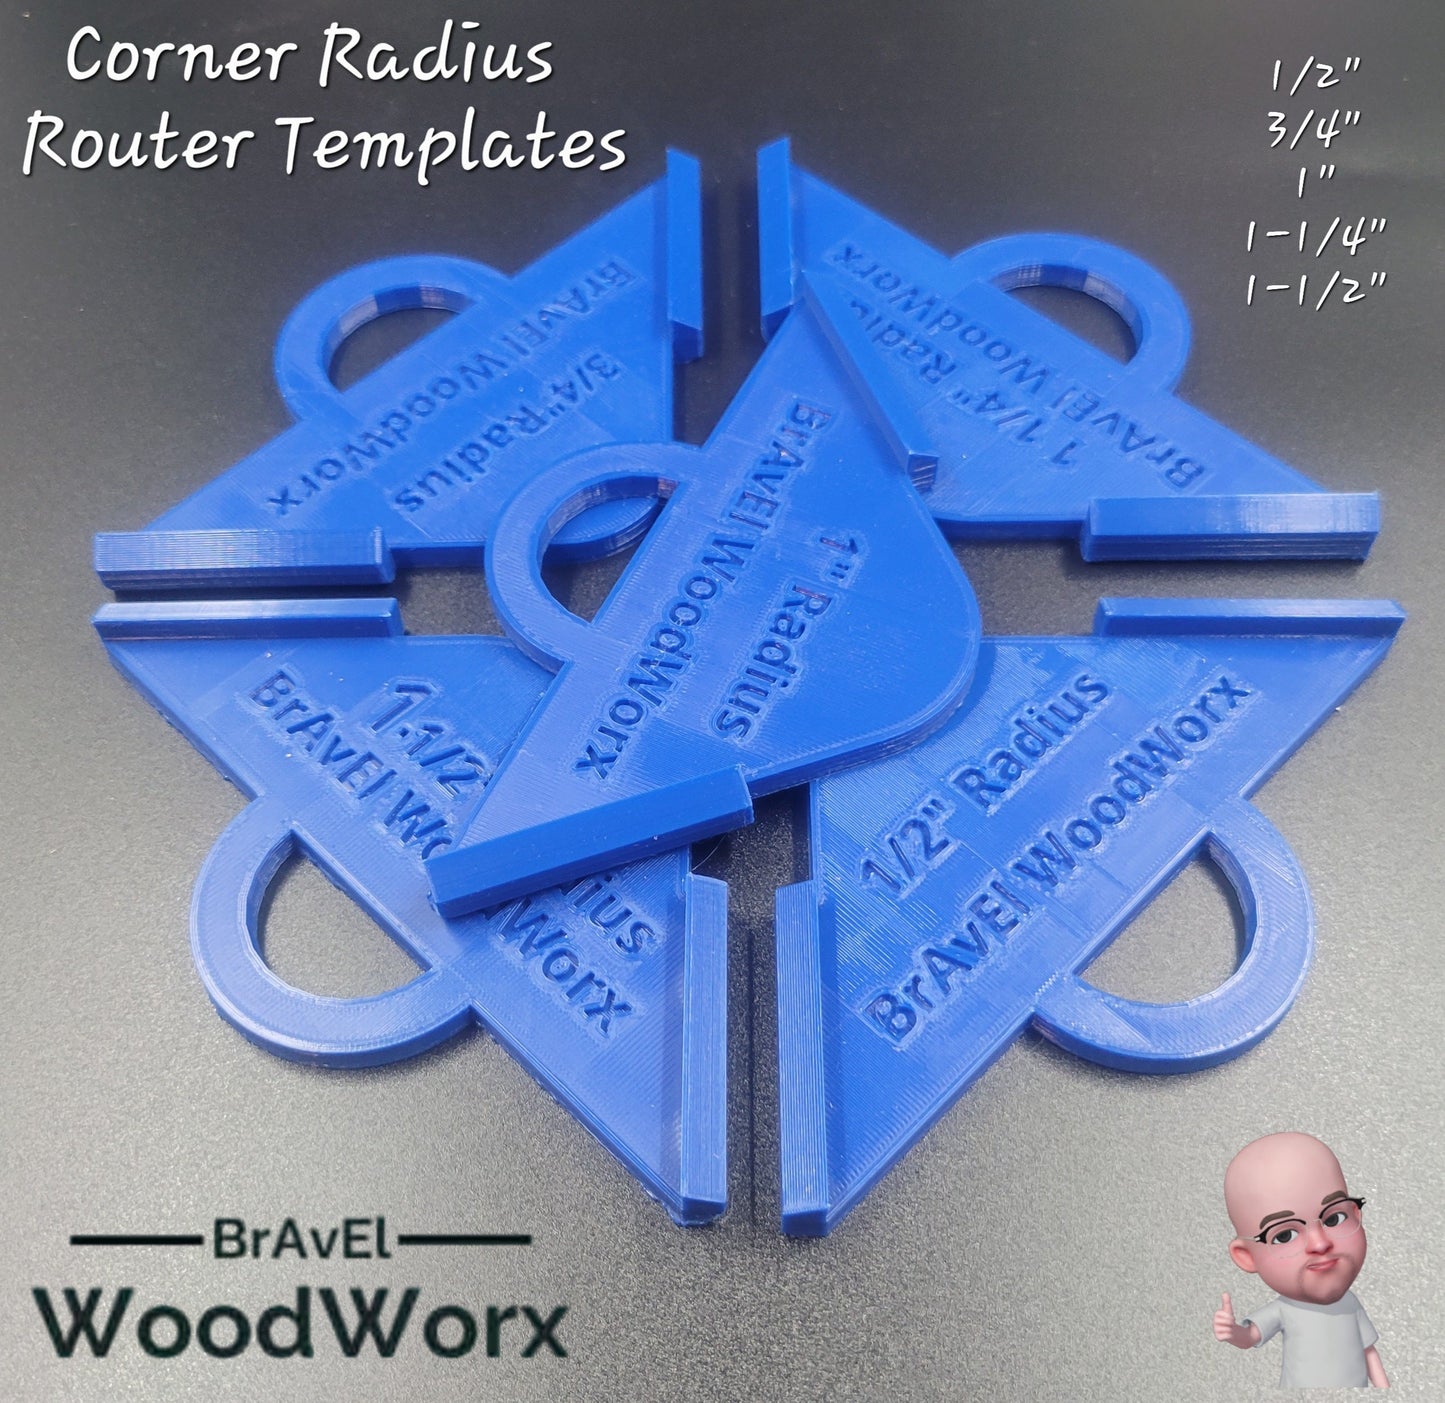 Precision 3D Printed Router Corner Radius Template Set: Achieve Perfect Curves Every Time!